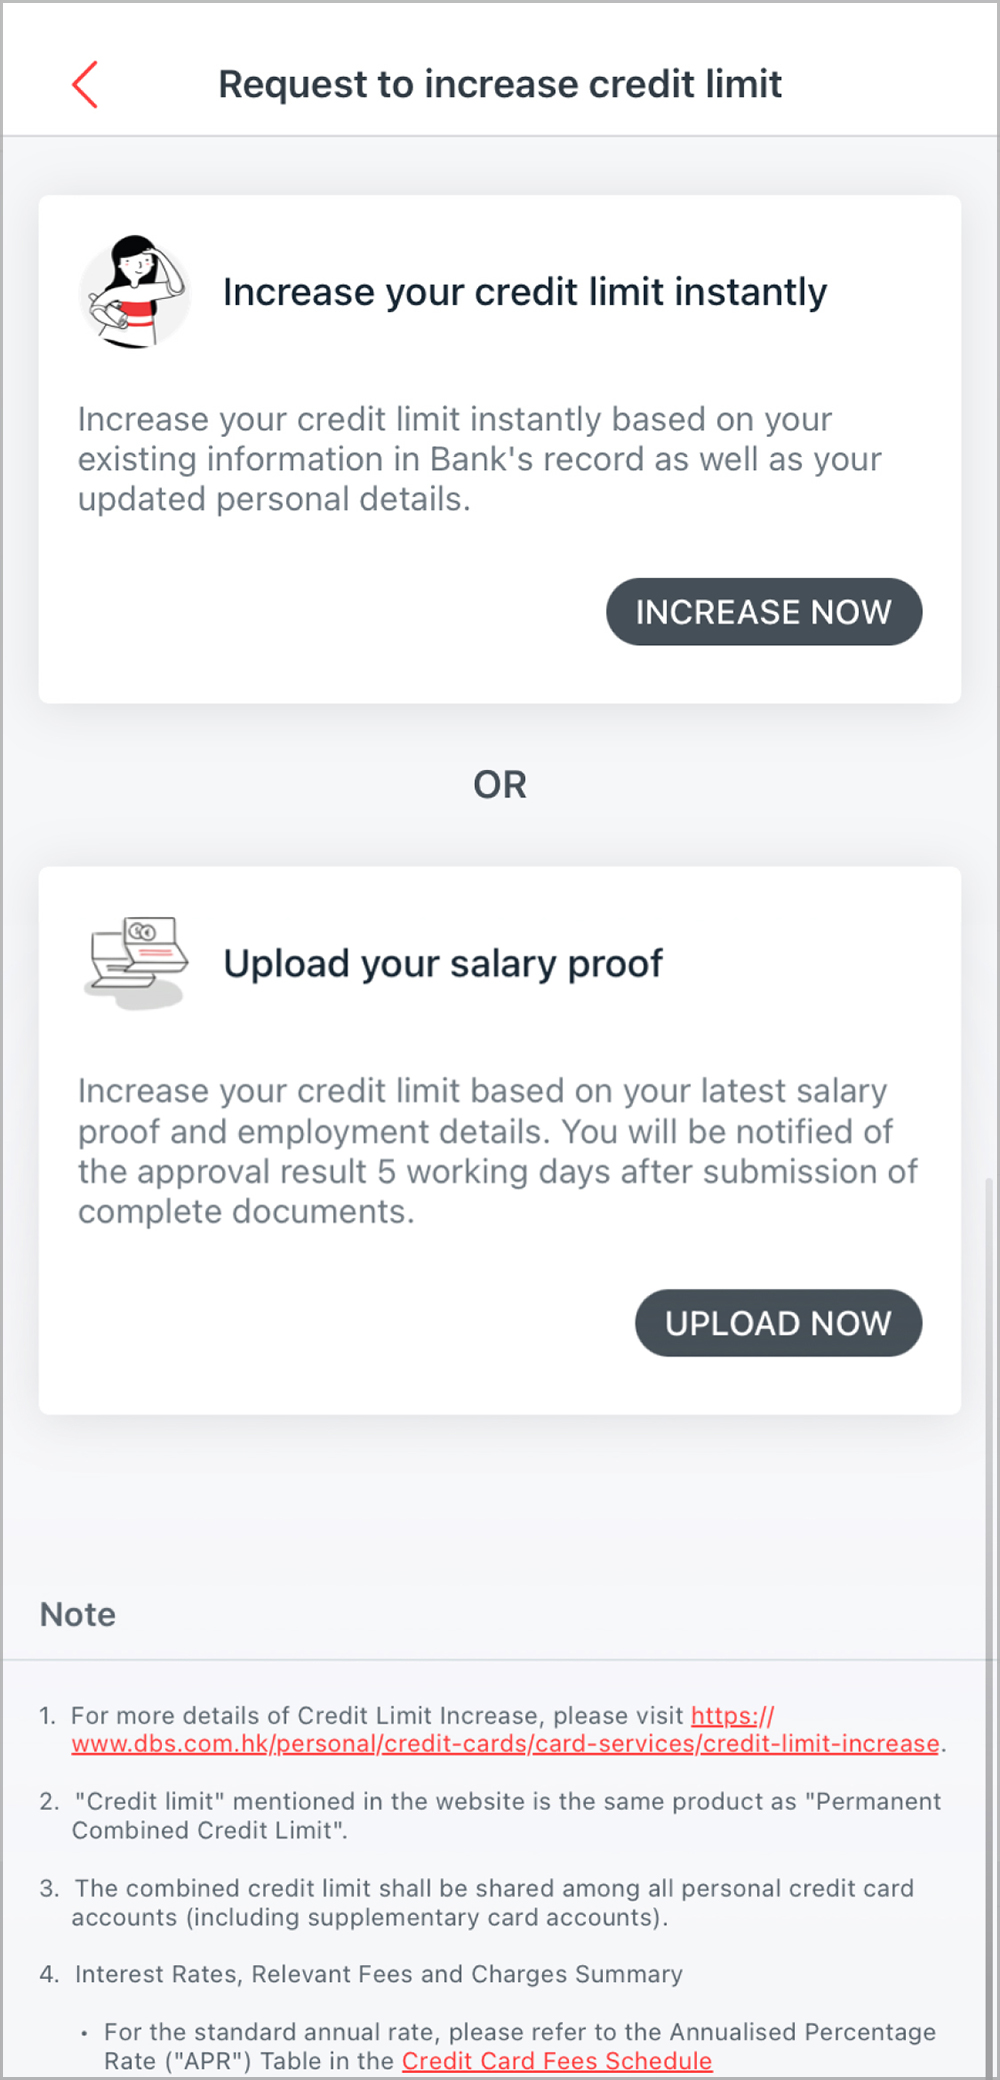 Tap on “Increase Now” or “Upload Now” to increase your credit limit